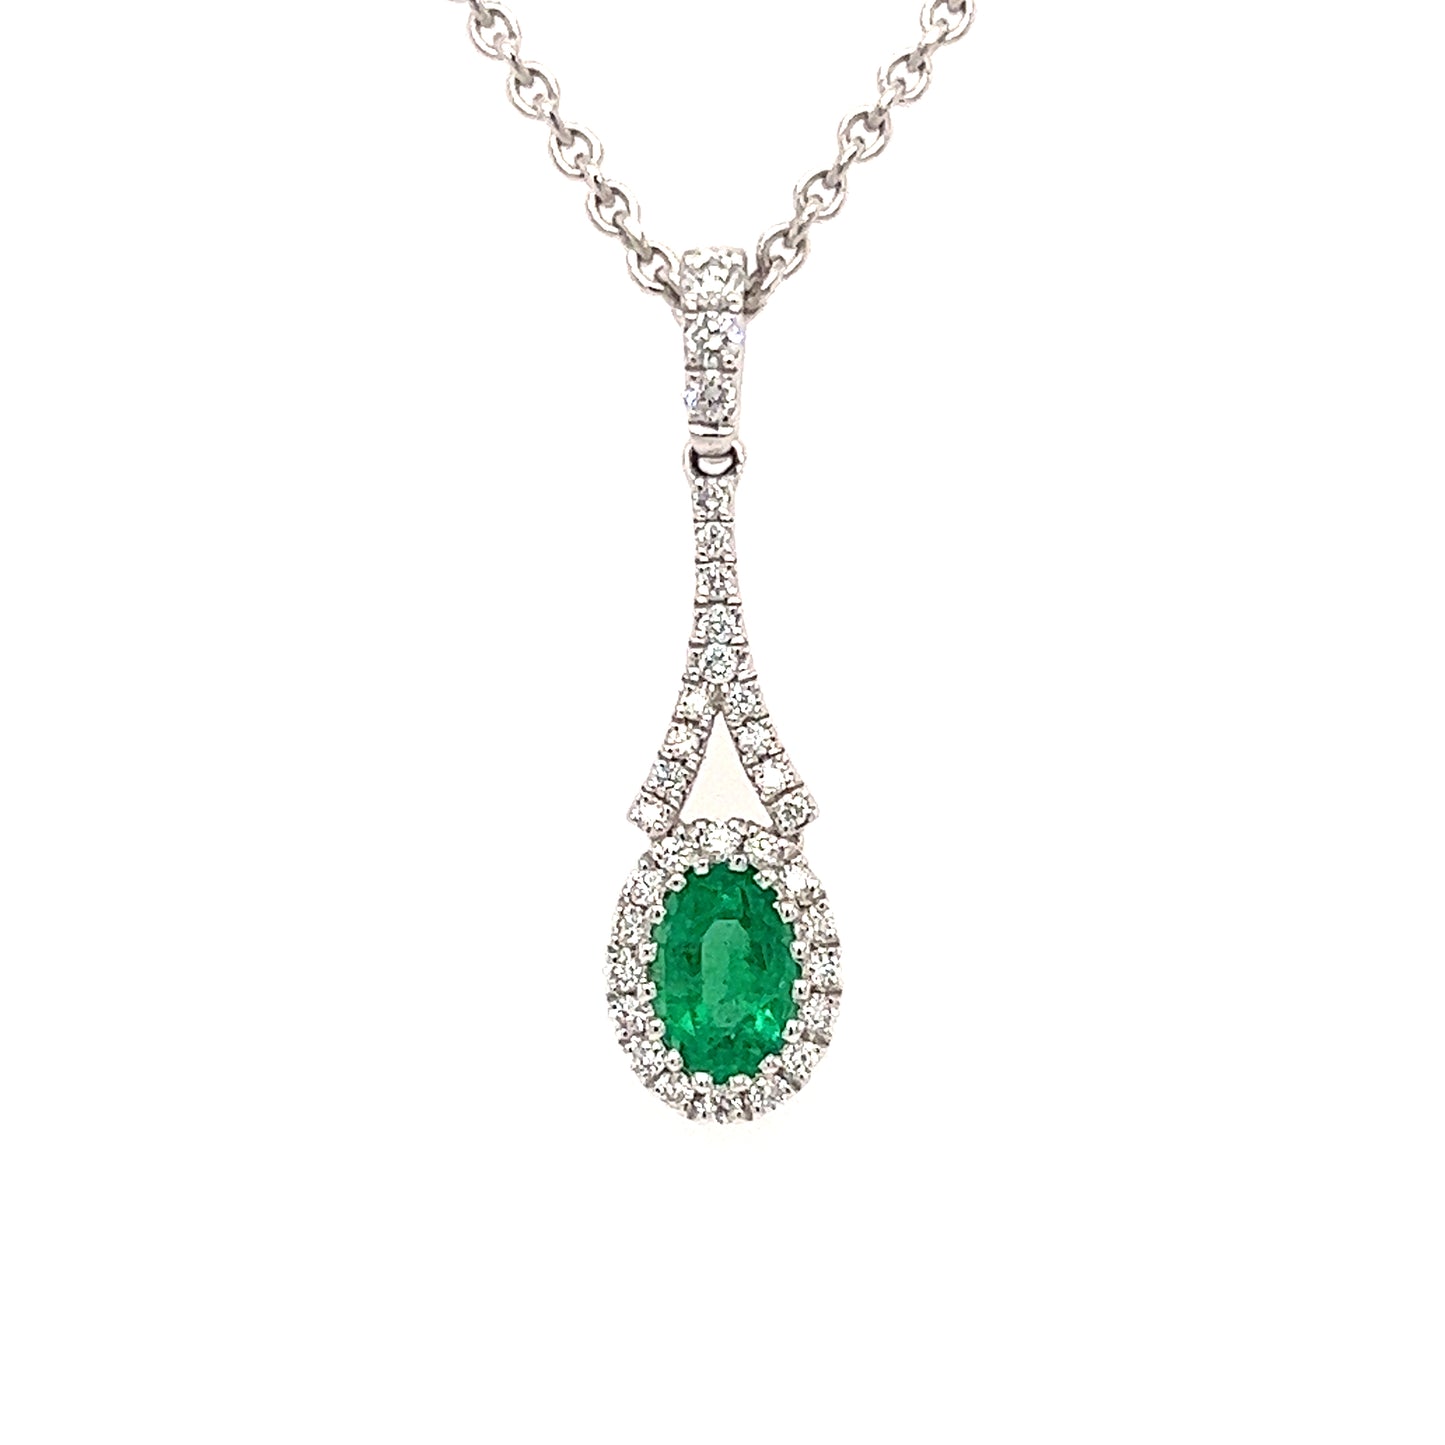 Oval Emerald Pendant with 32 Diamonds in 18K White Gold Pendant Front View